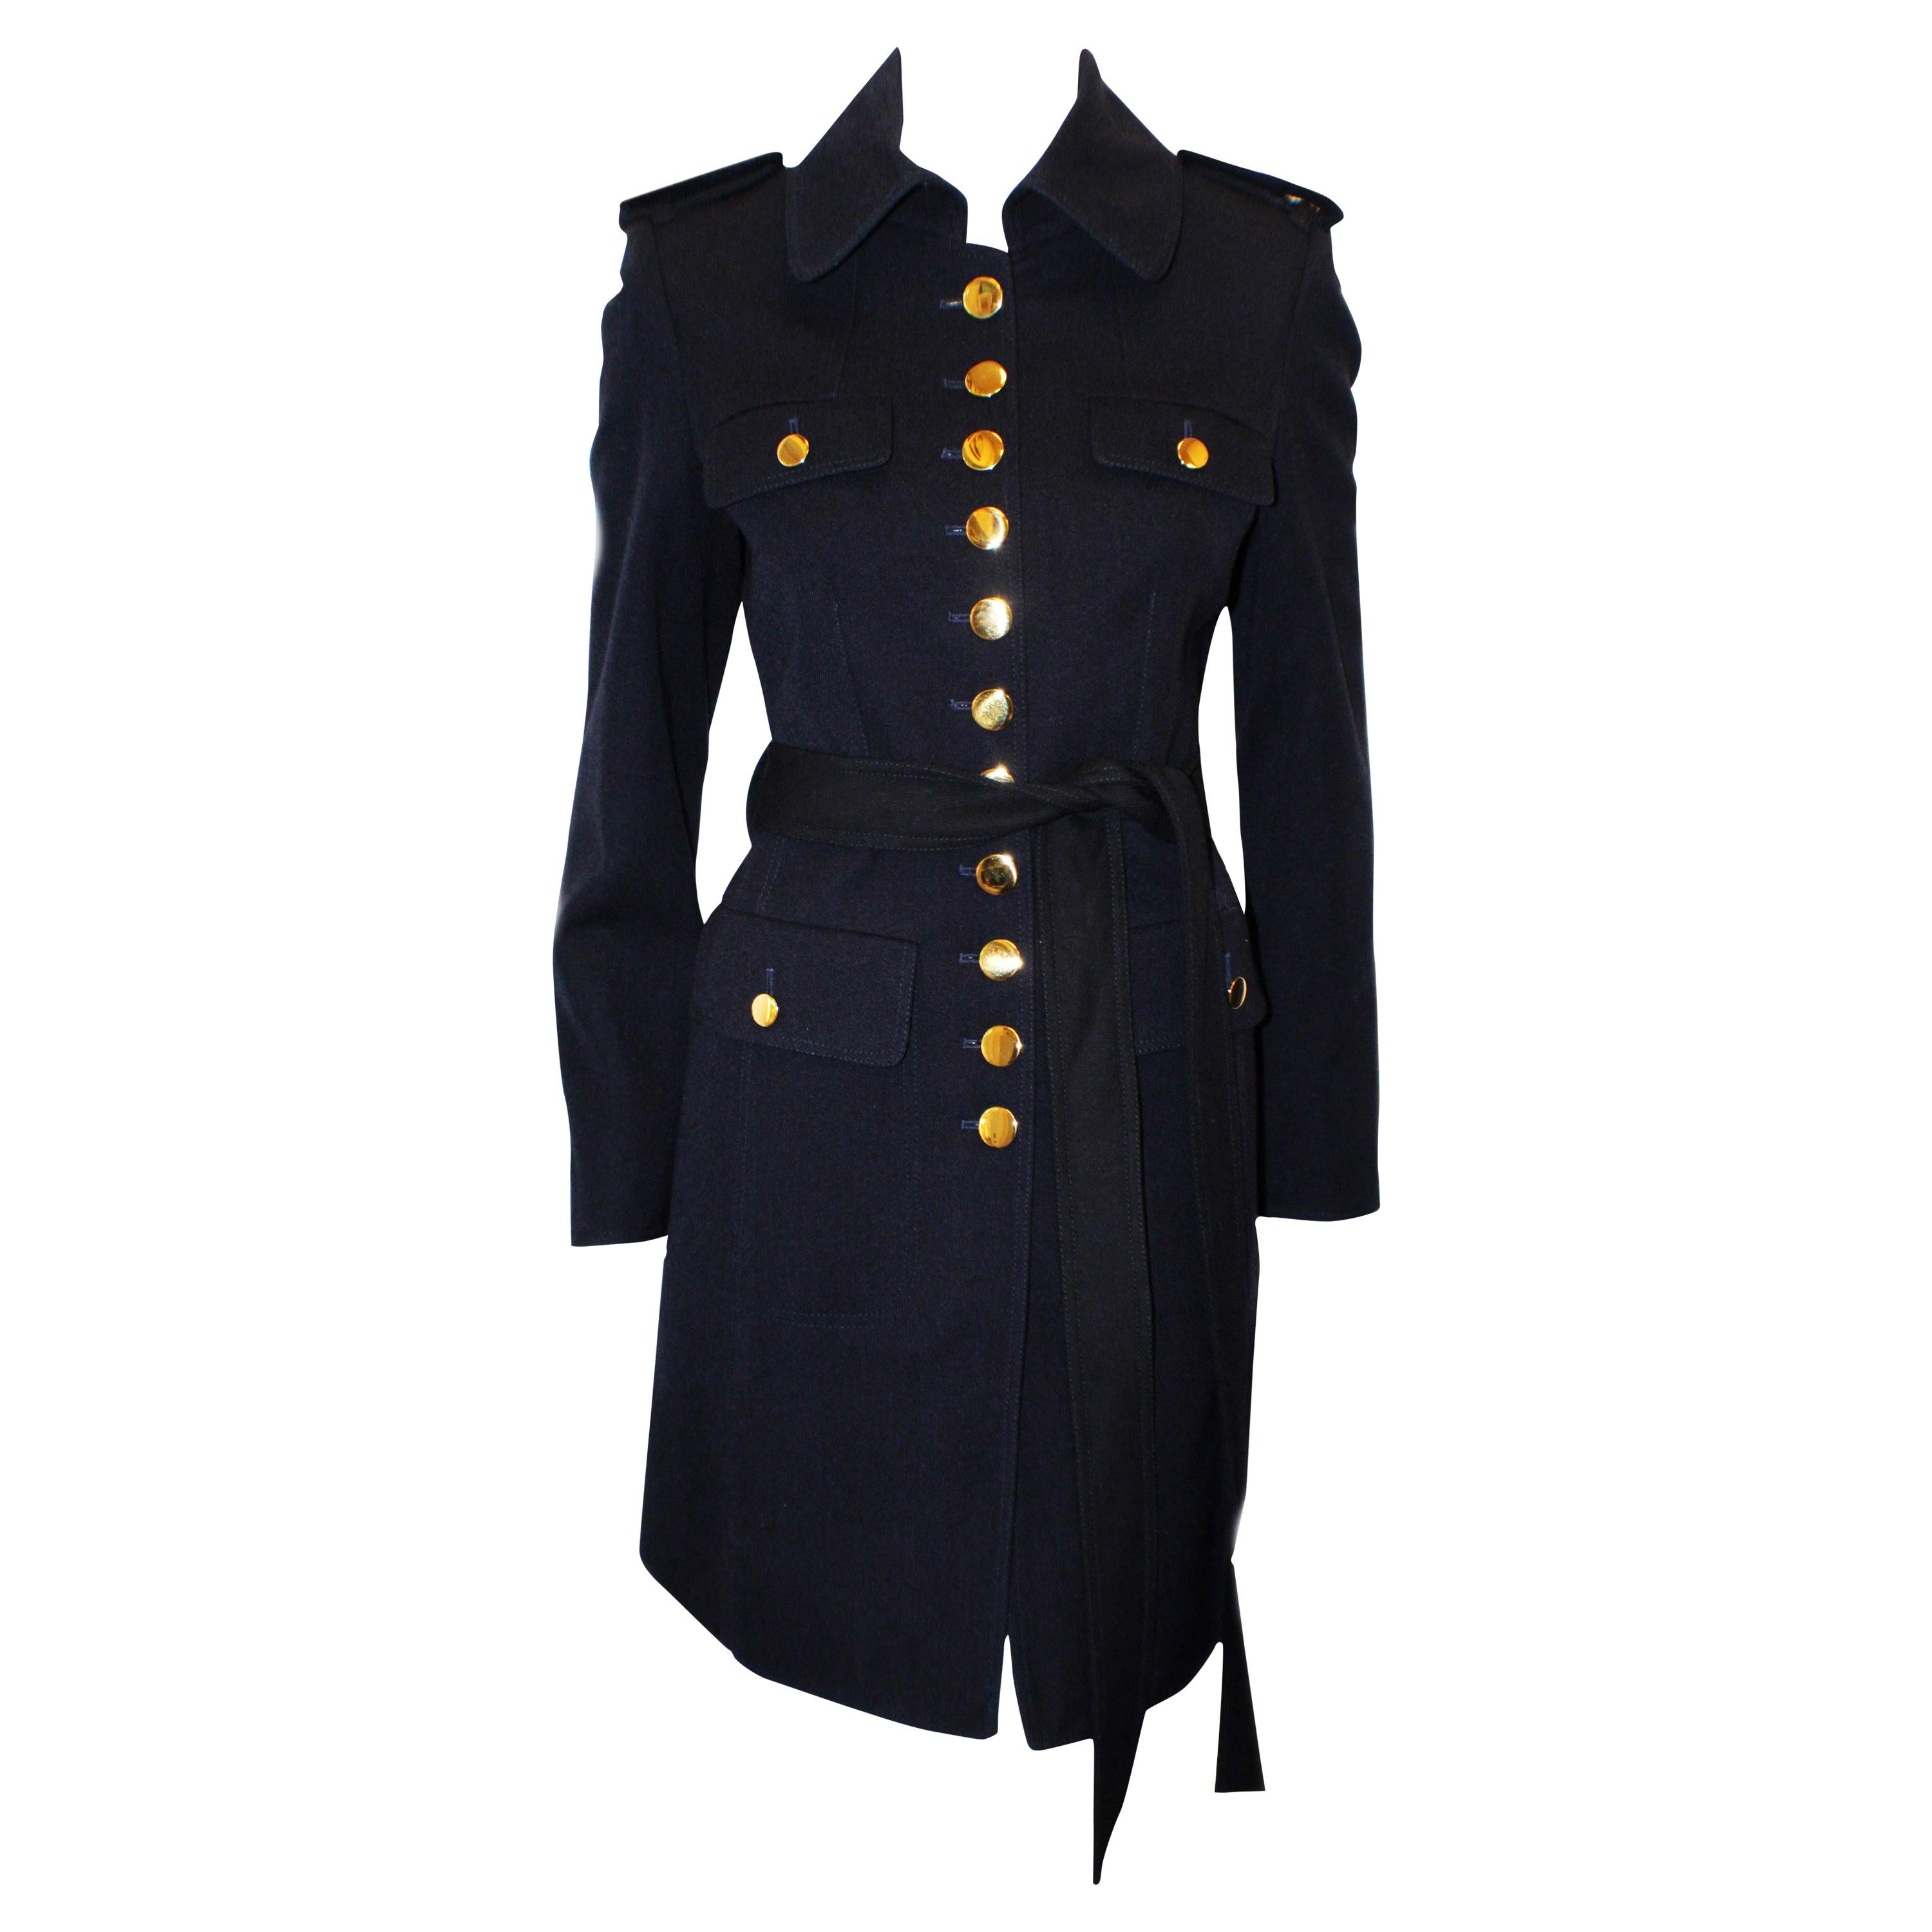 Moloh of the United Kingdom 3/4 Navy Belted Military Style Coat For Sale